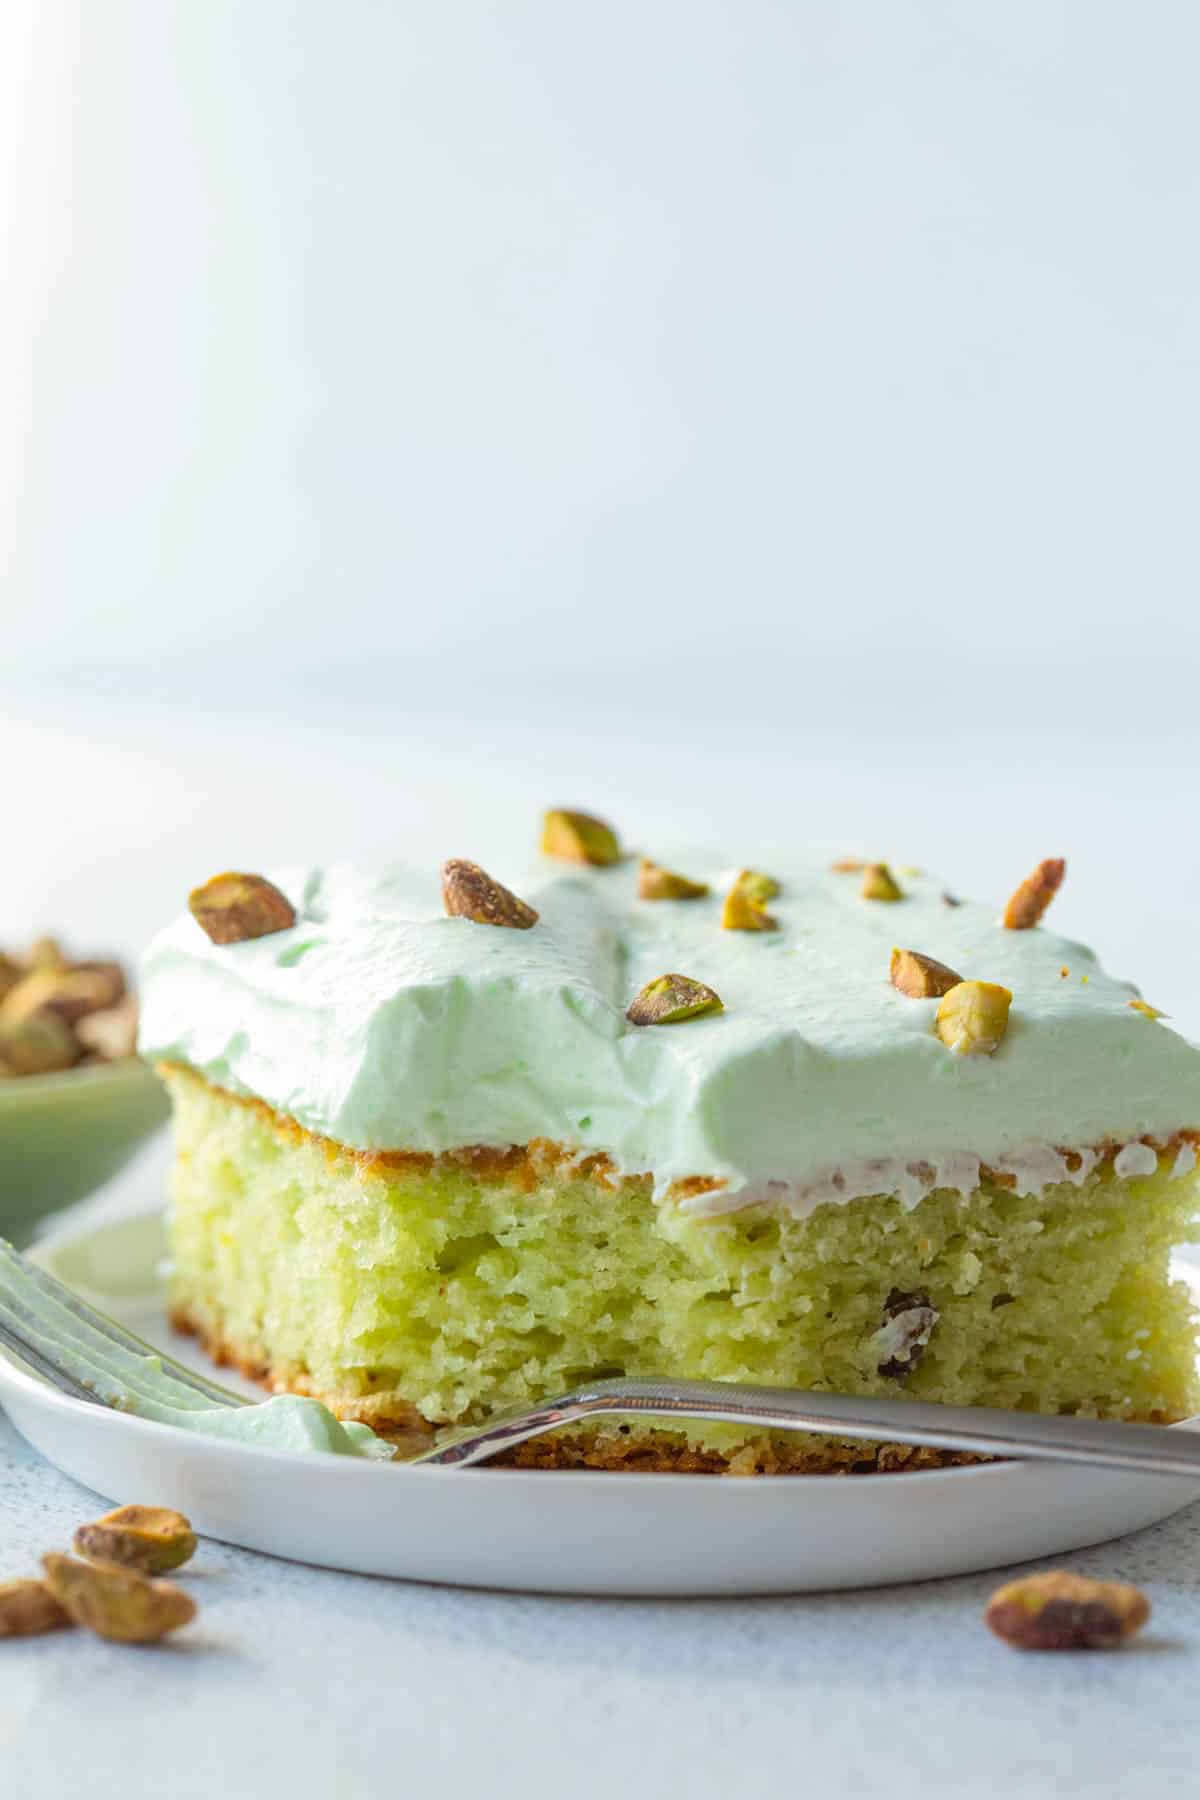 slice of pistachio cake with pudding mix on a white plate, topped with a pistachio frosting and chopped pistachios.